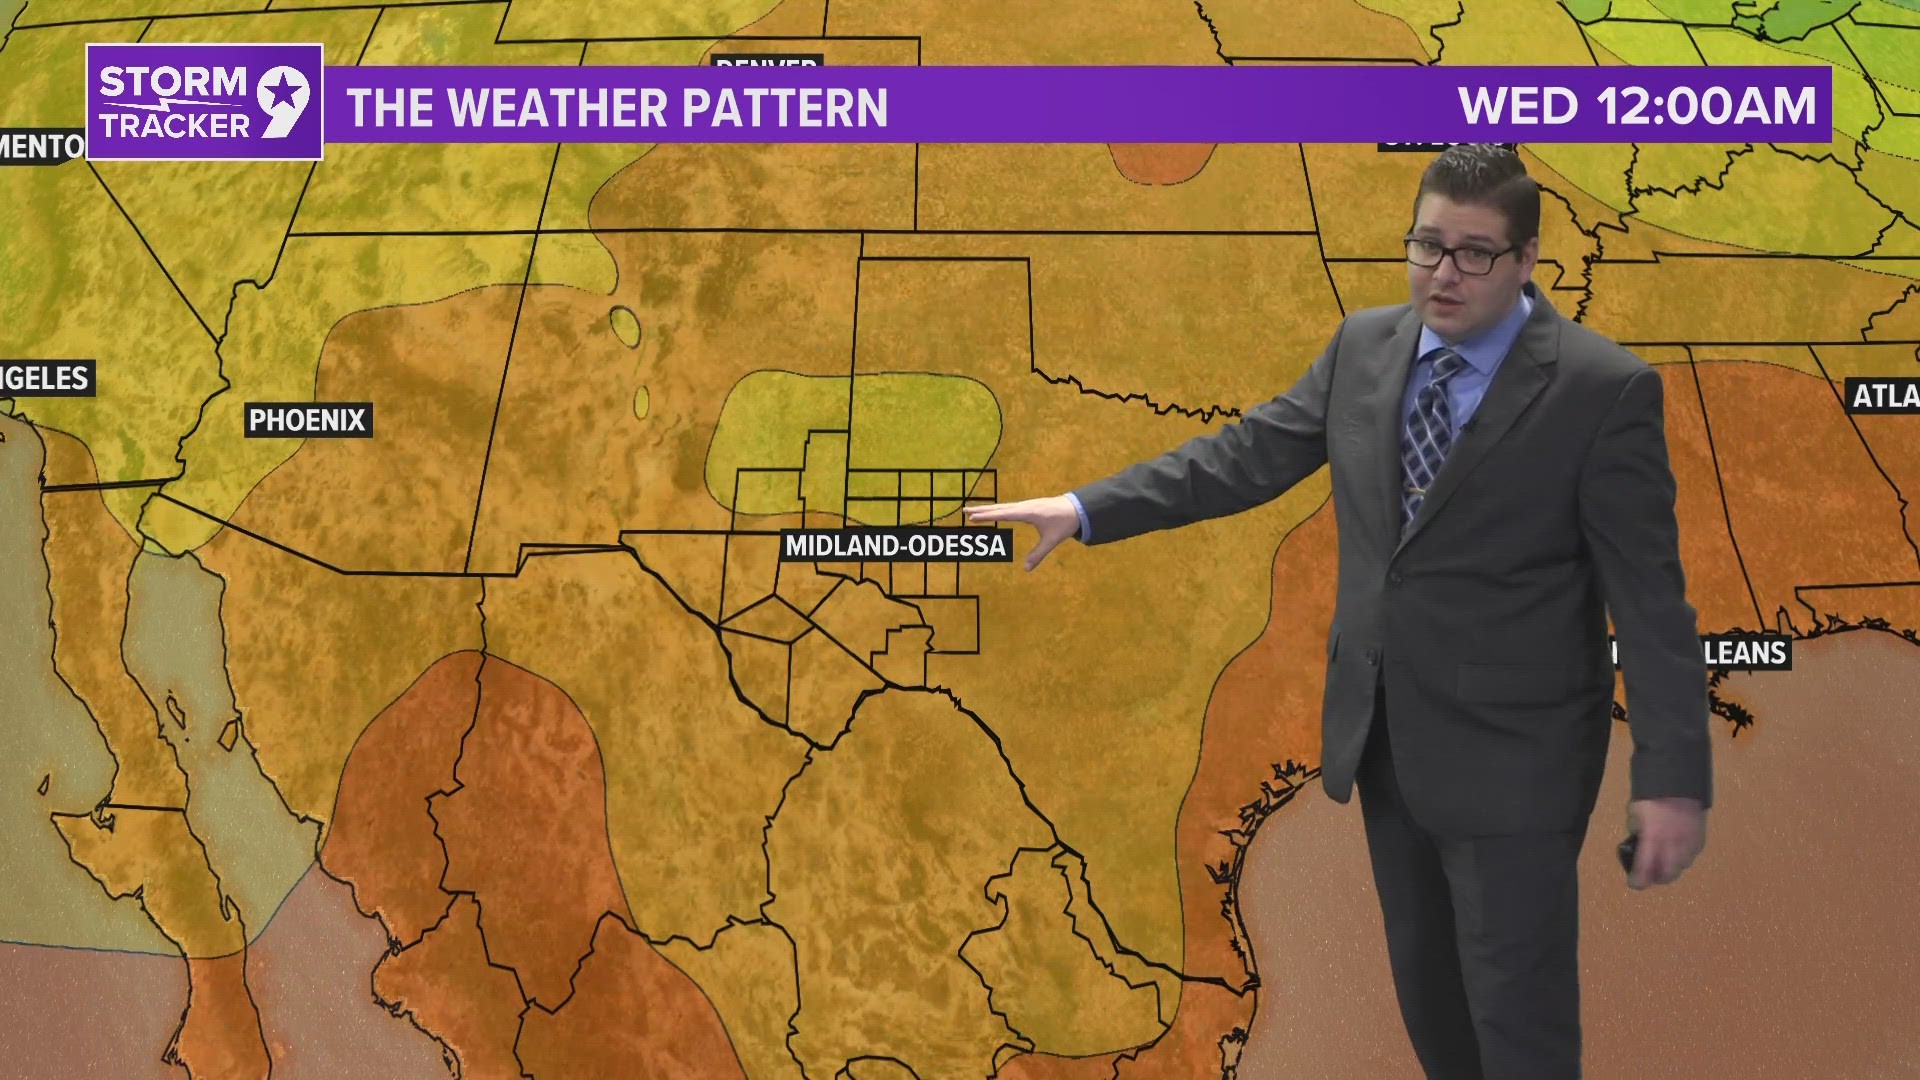 While the above average temperatures may not be ideal, no large scale storm systems are projected to come through.